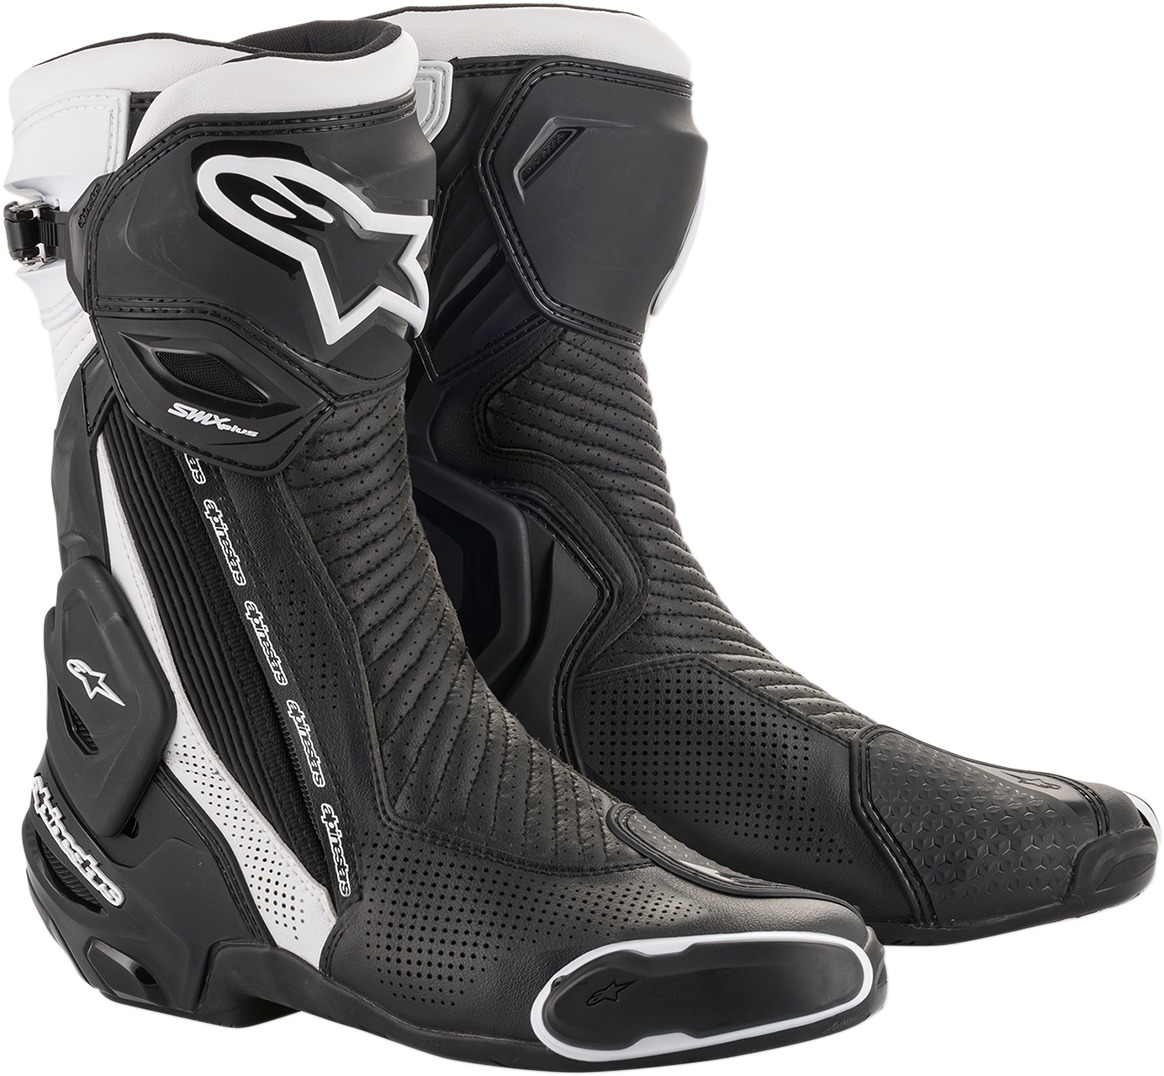 SMX Plus Street Riding Boots Black/White US 9 - Click Image to Close